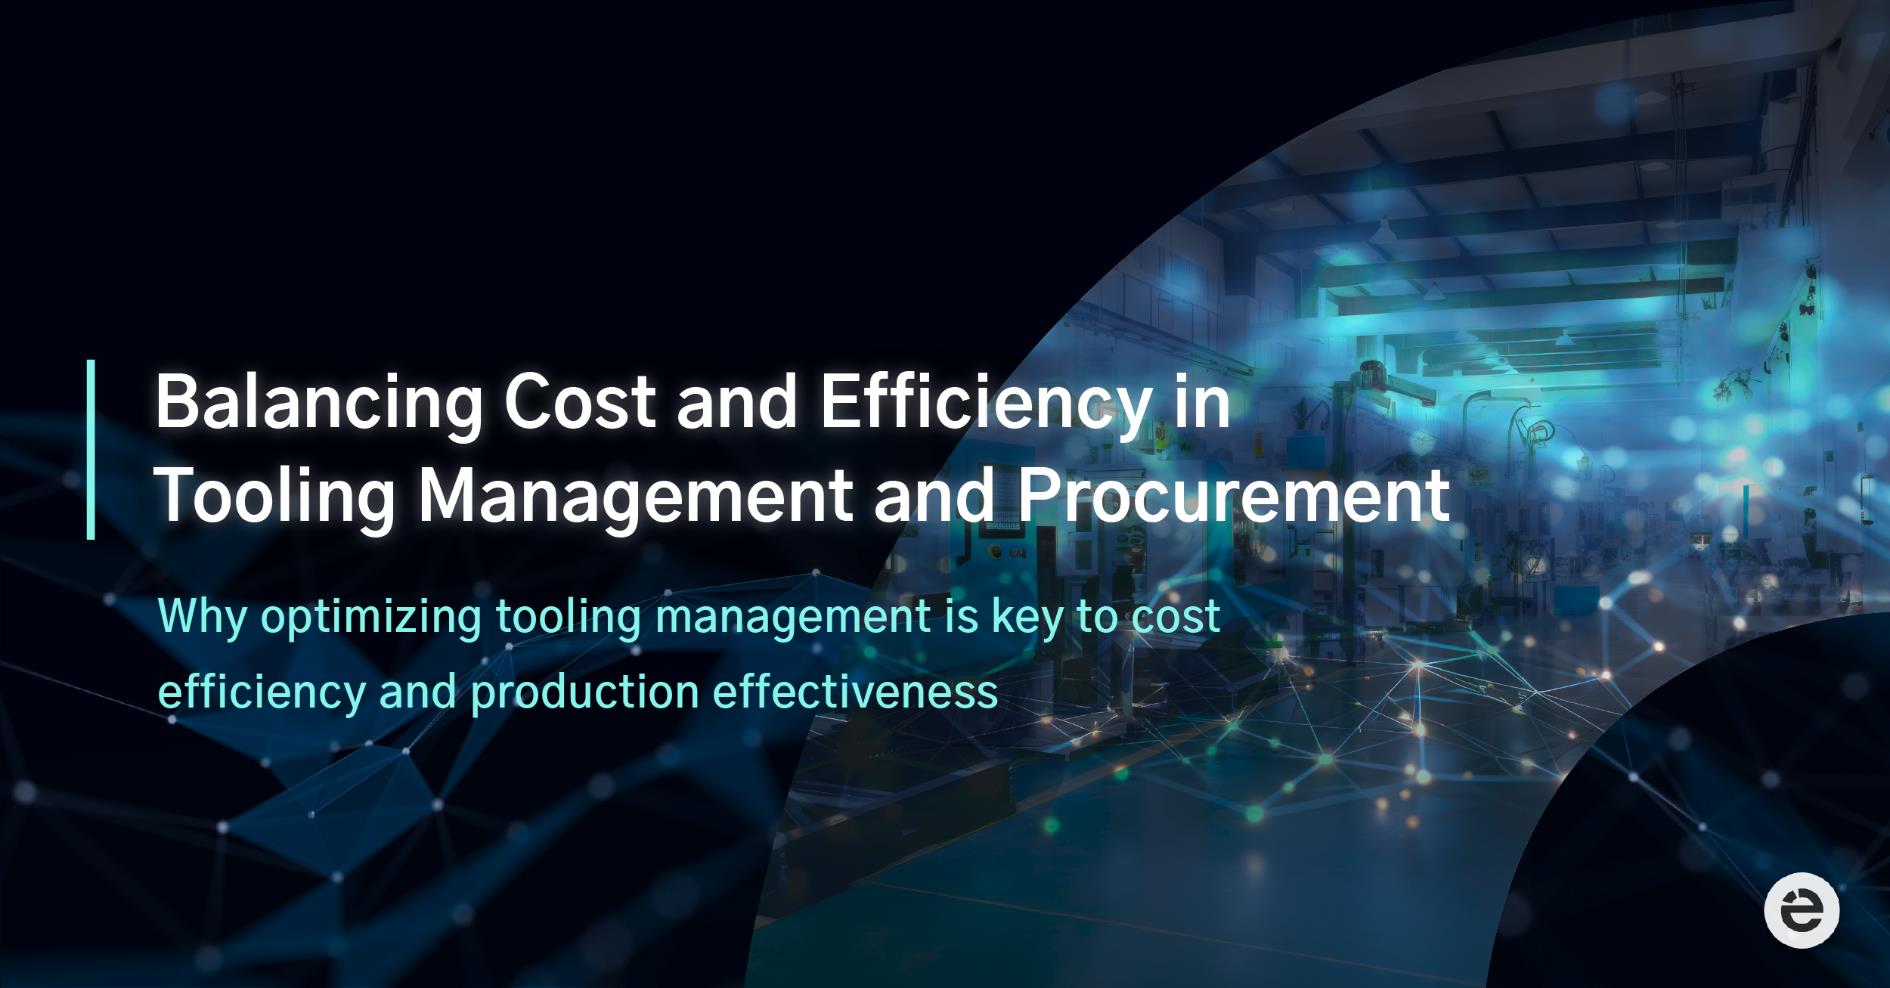 Balancing Cost and Efficiency in Tooling Management and Procurement